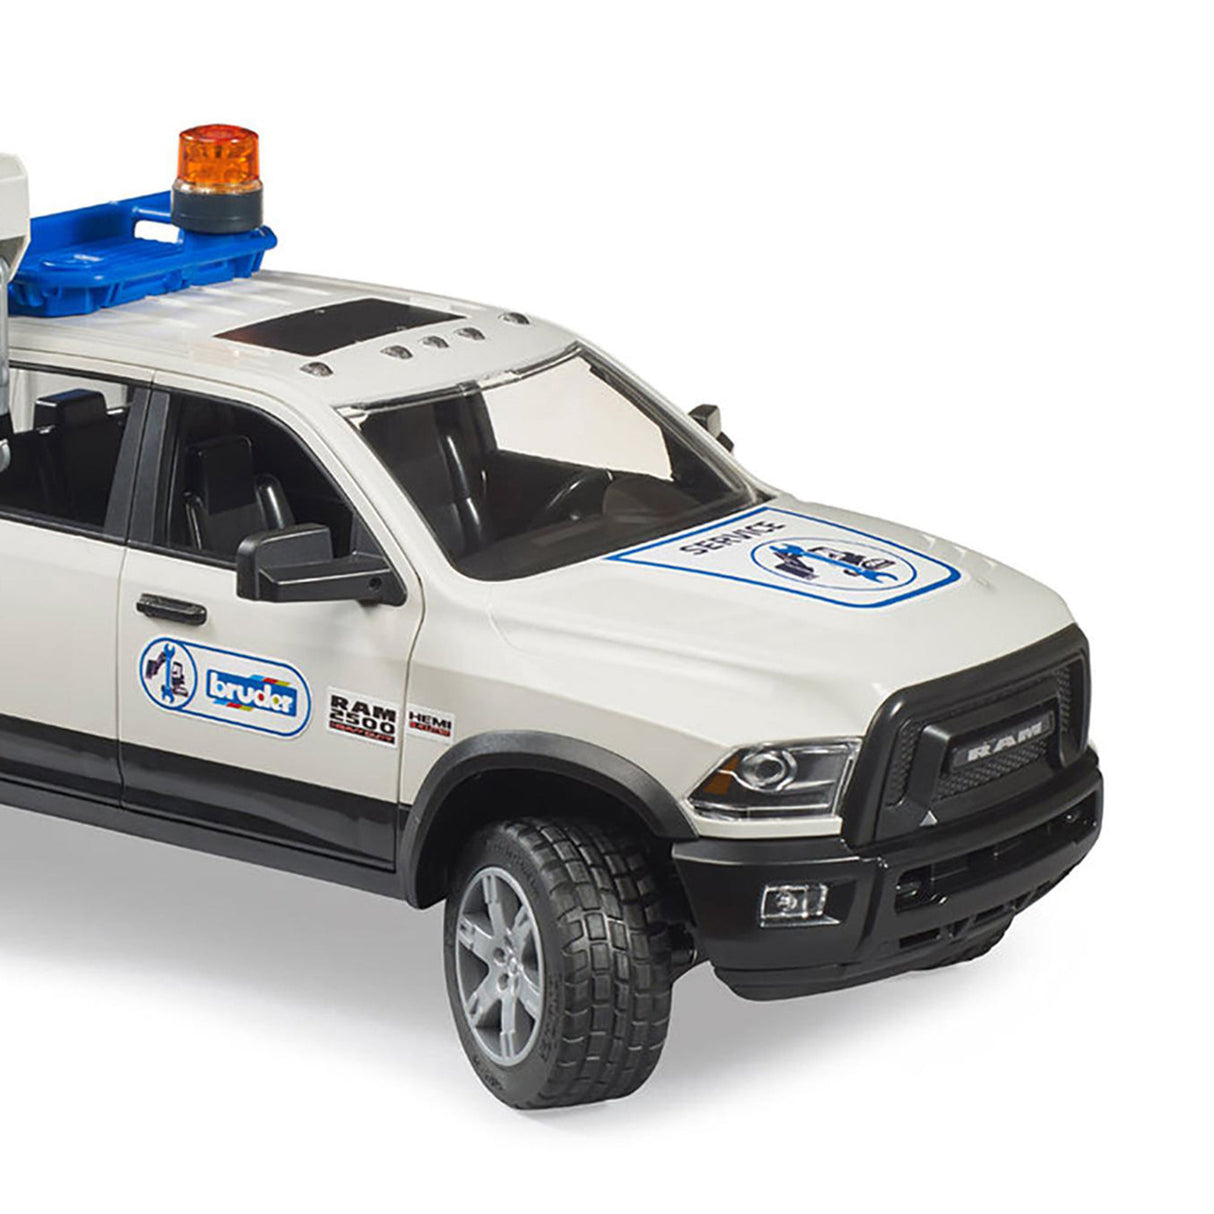 Bruder 1:16 RAM 2500 Service Trucl with rotating Beacon Light